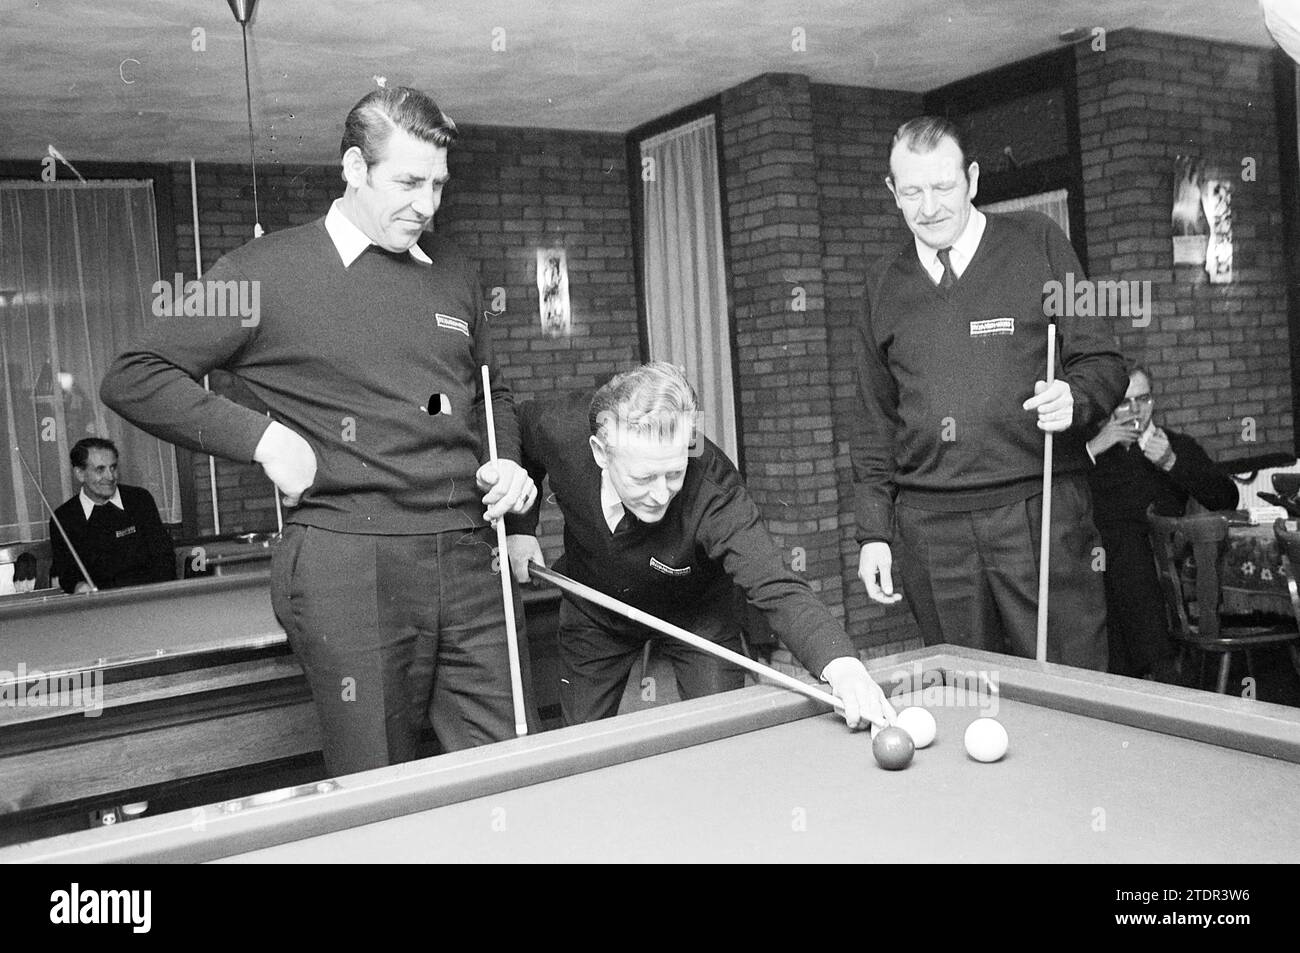 Billiards., Whizgle News from the Past, Tailored for the Future. Explore historical narratives, Dutch The Netherlands agency image with a modern perspective, bridging the gap between yesterday's events and tomorrow's insights. A timeless journey shaping the stories that shape our future Stock Photo